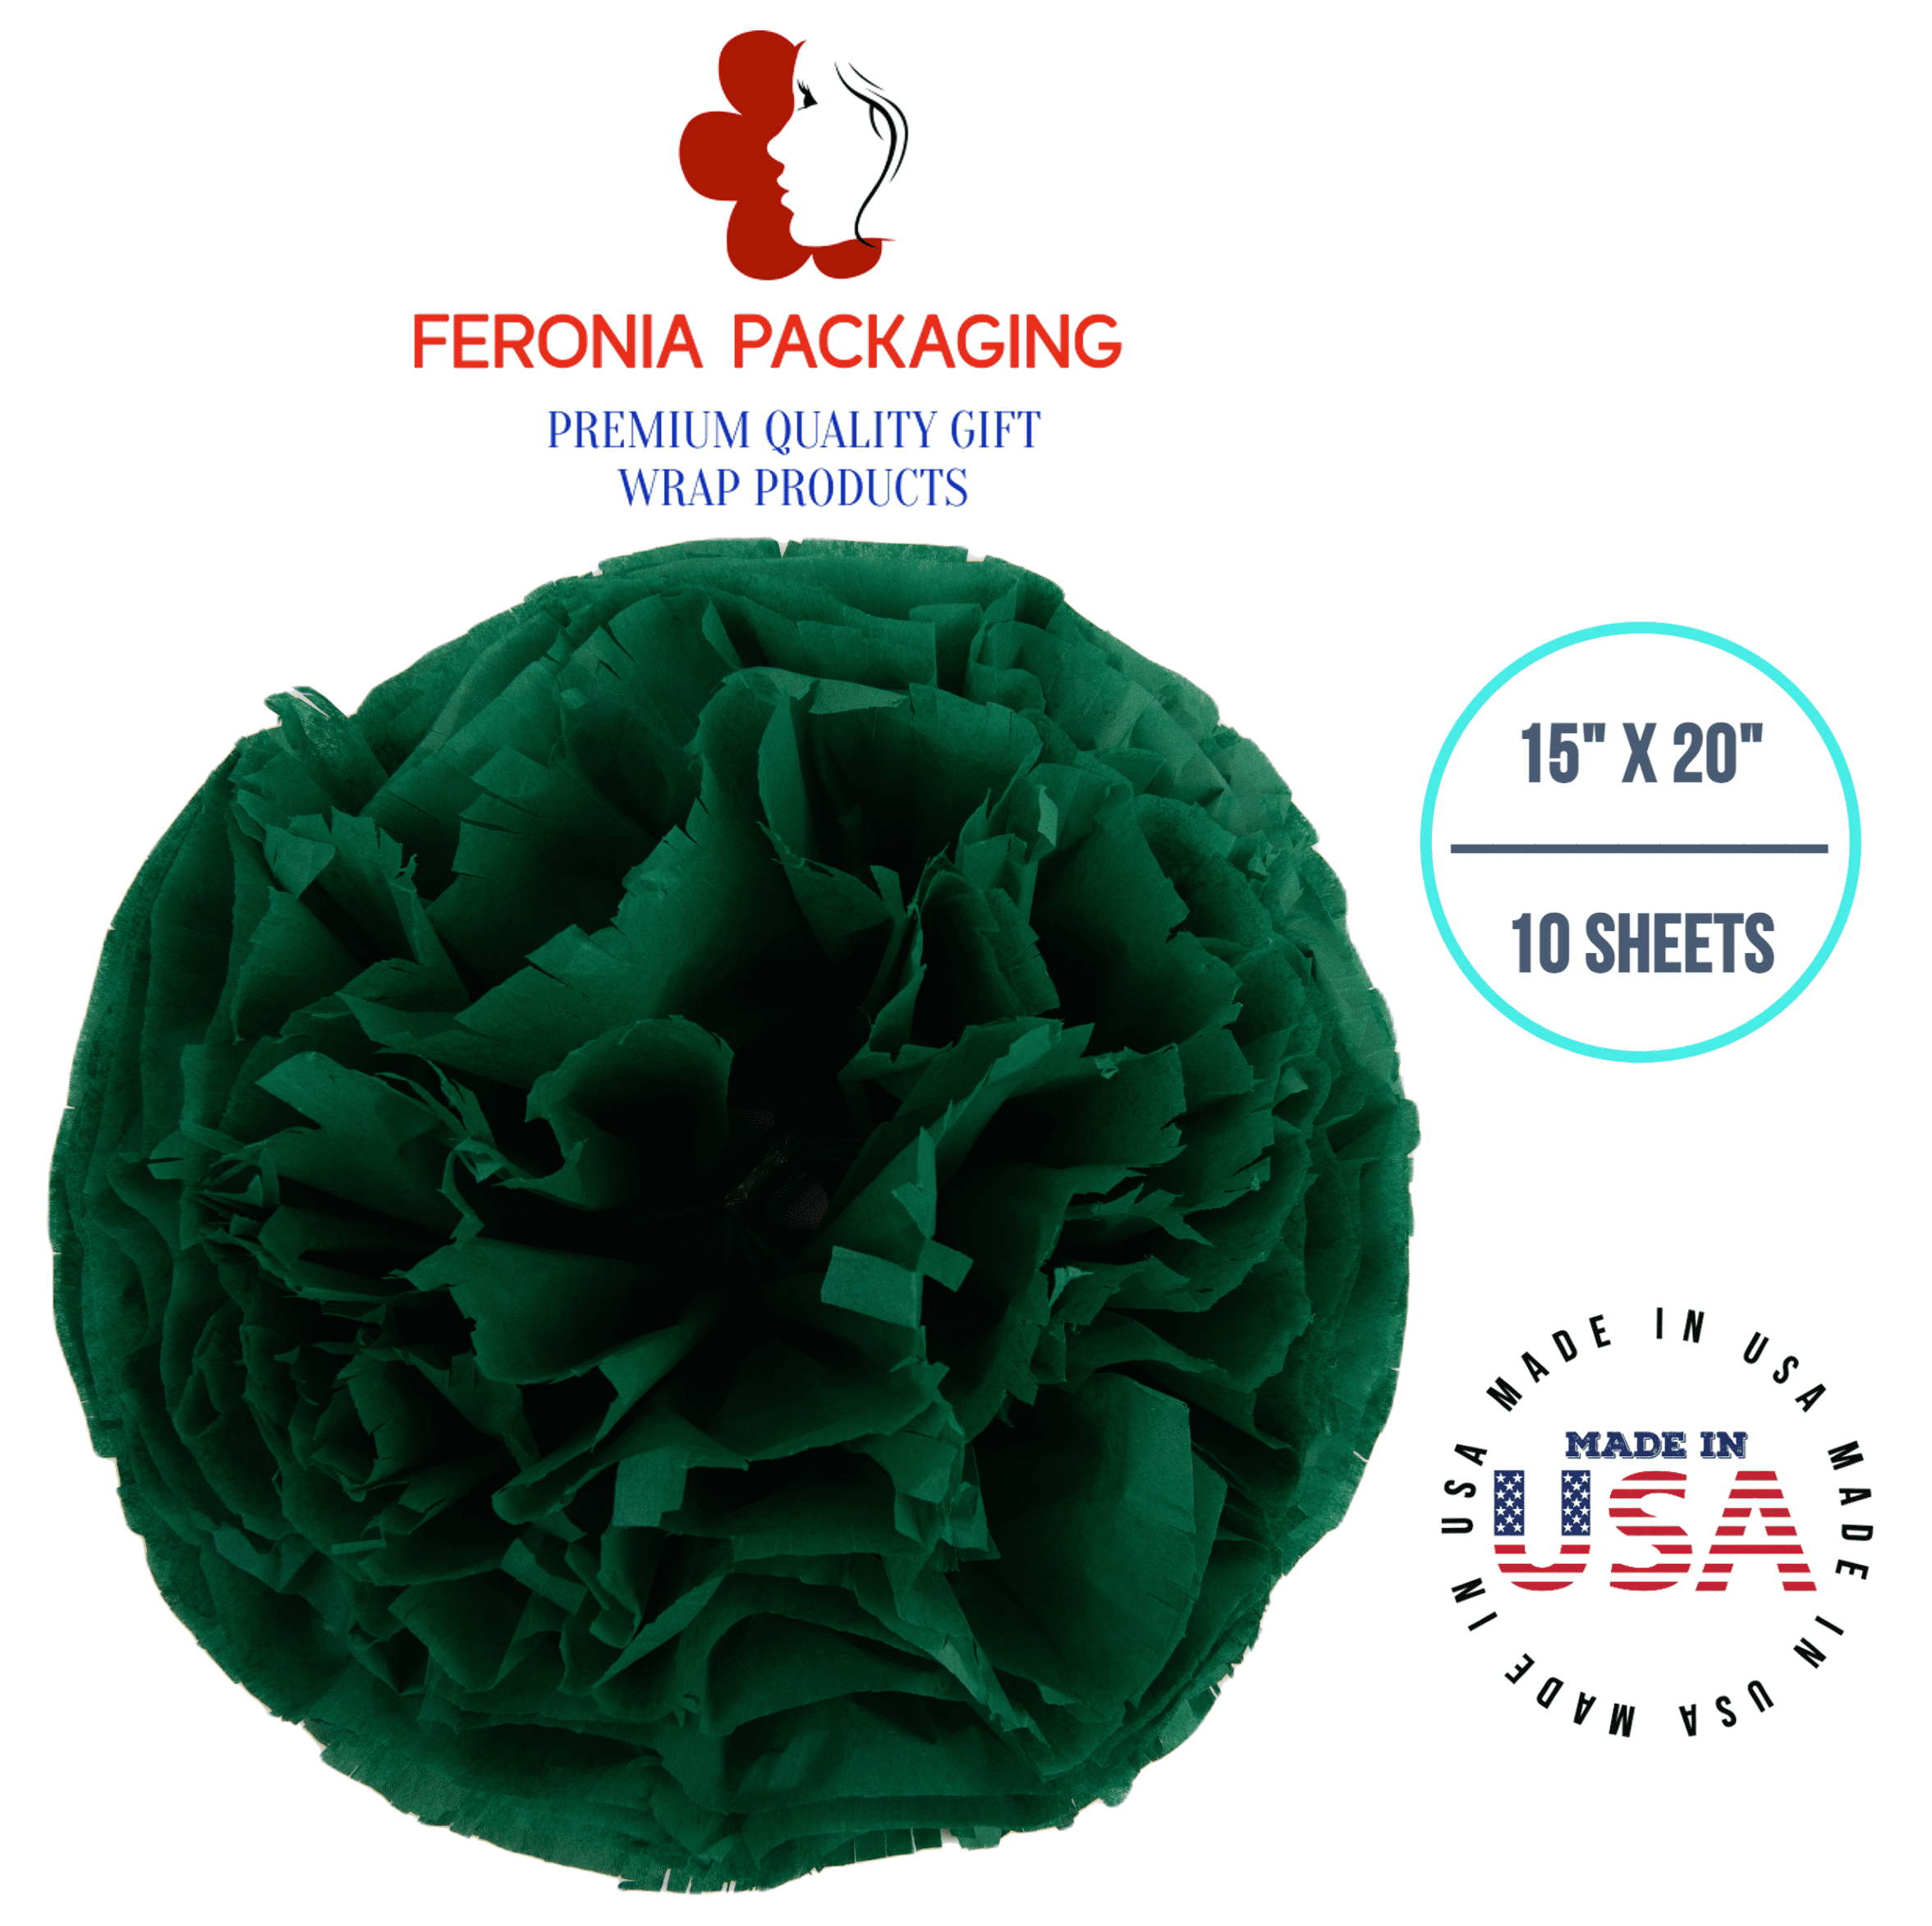 Emerald Green Tissue Paper Squares, Bulk 10 Sheets, Premium Gift Wrap and  Art Supplies for Birthdays, Holidays, or Presents by Feronia packaging,  Large 15 Inch x 20 Inch 